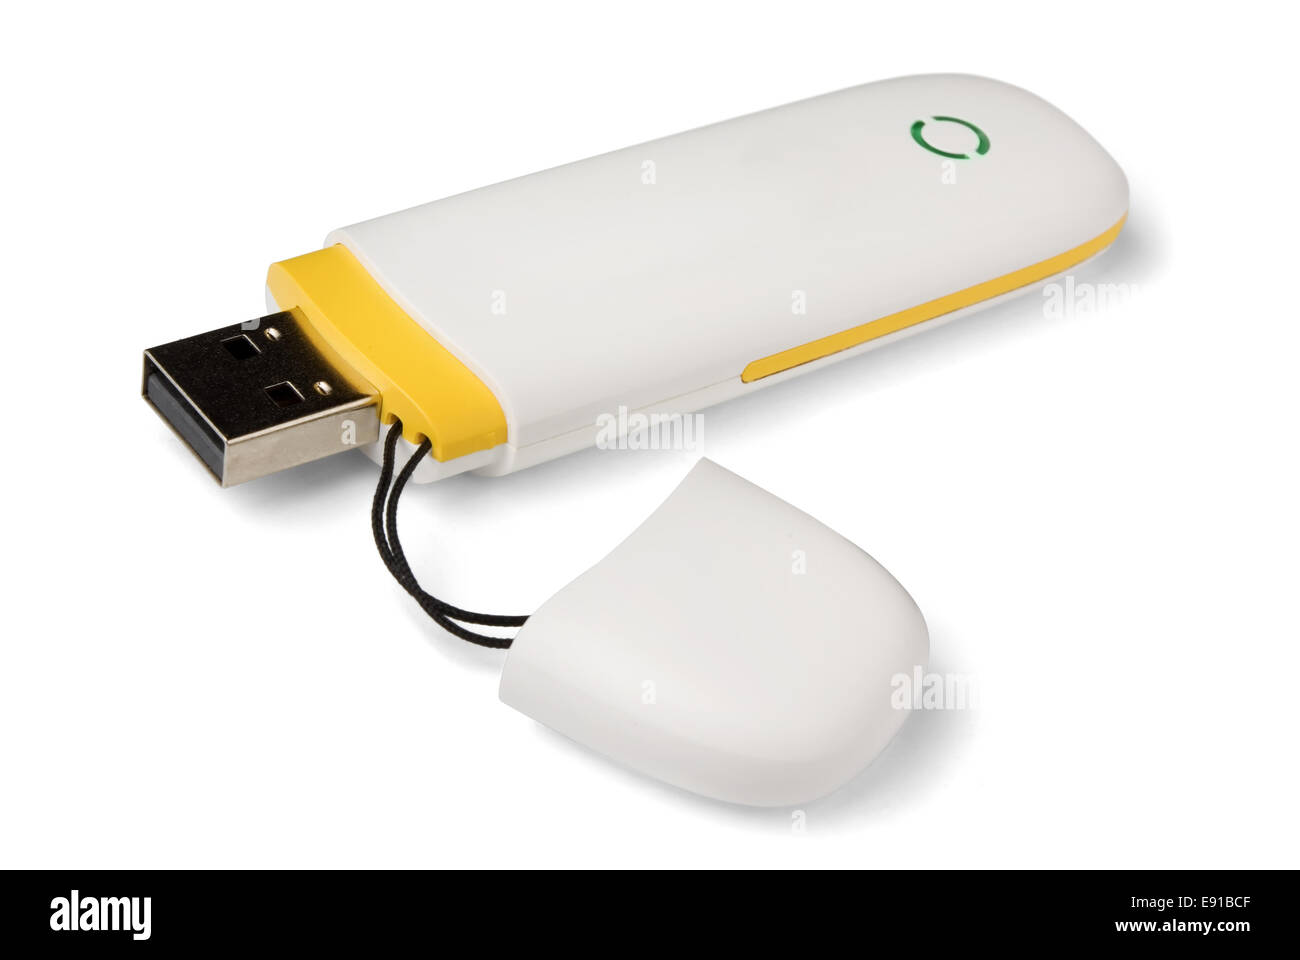 Modem Laptop High Resolution Stock Photography and Images - Alamy